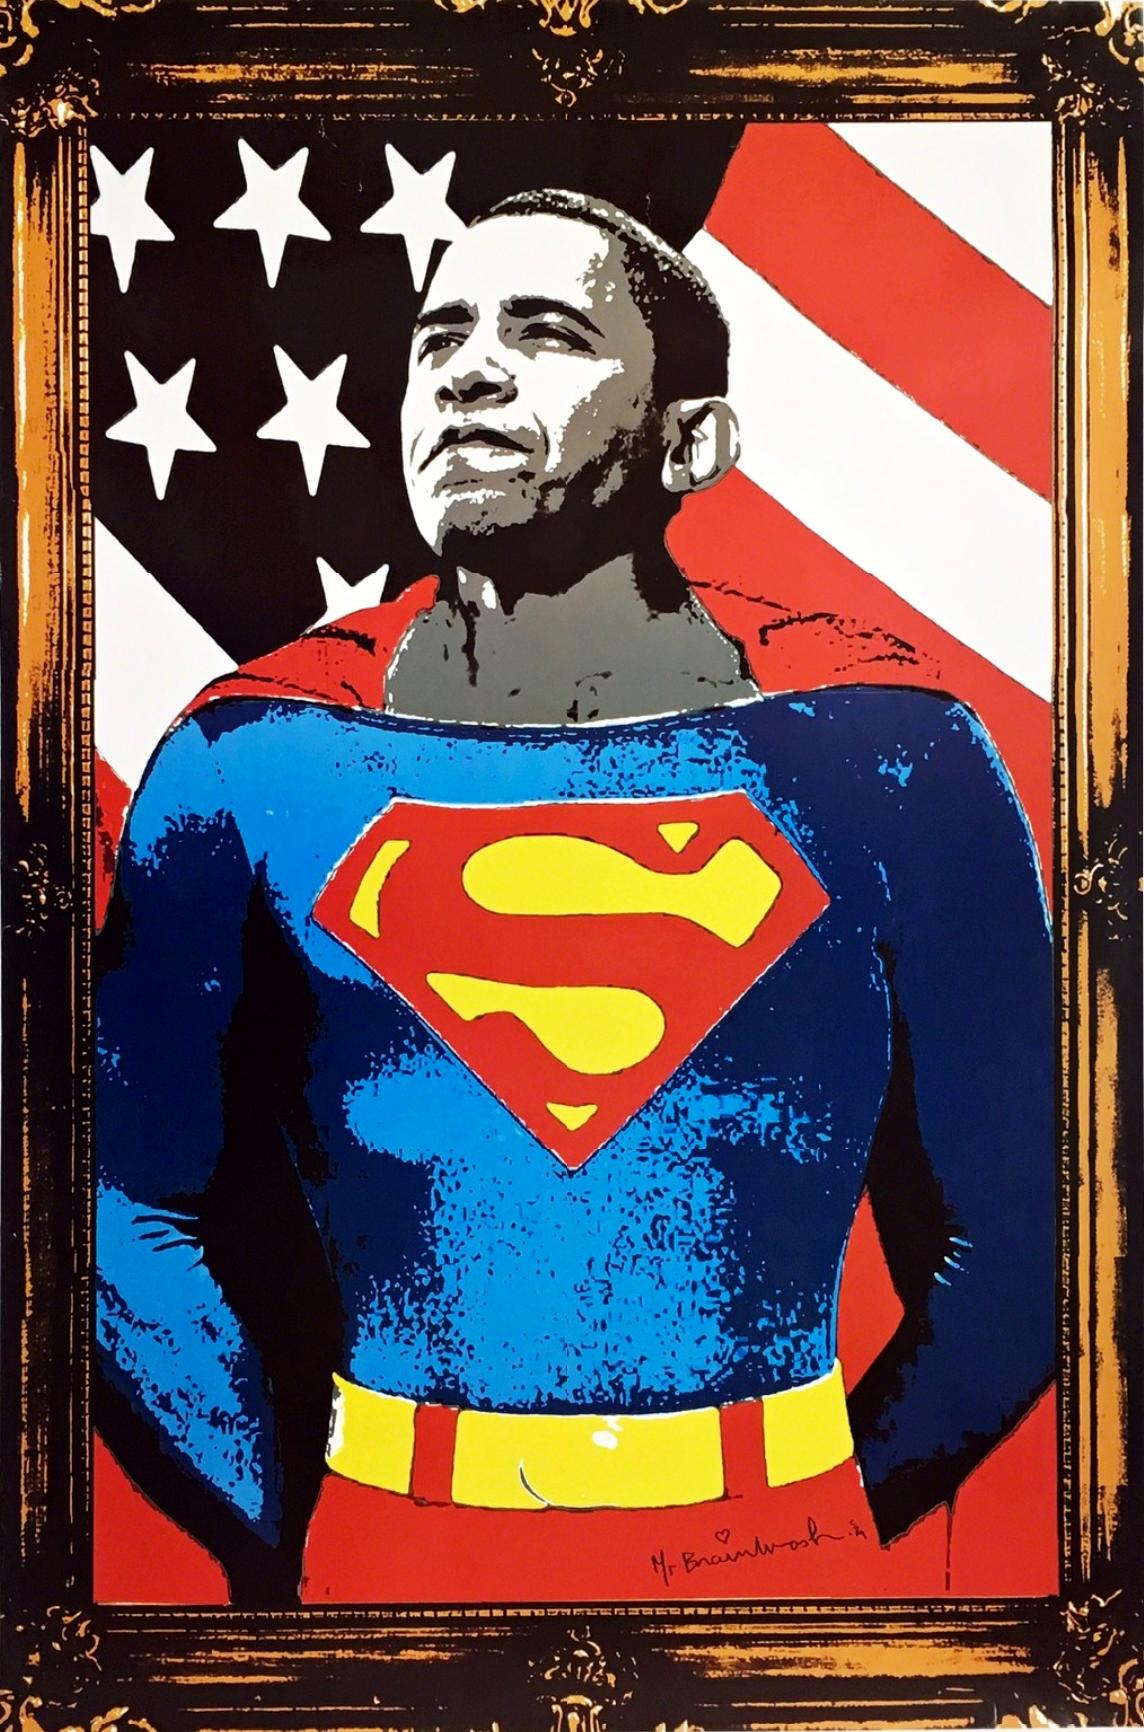 "Obama Superman" Offset Lithograph on Paper, Cultural Commentary, Signed - Print by Mr. Brainwash